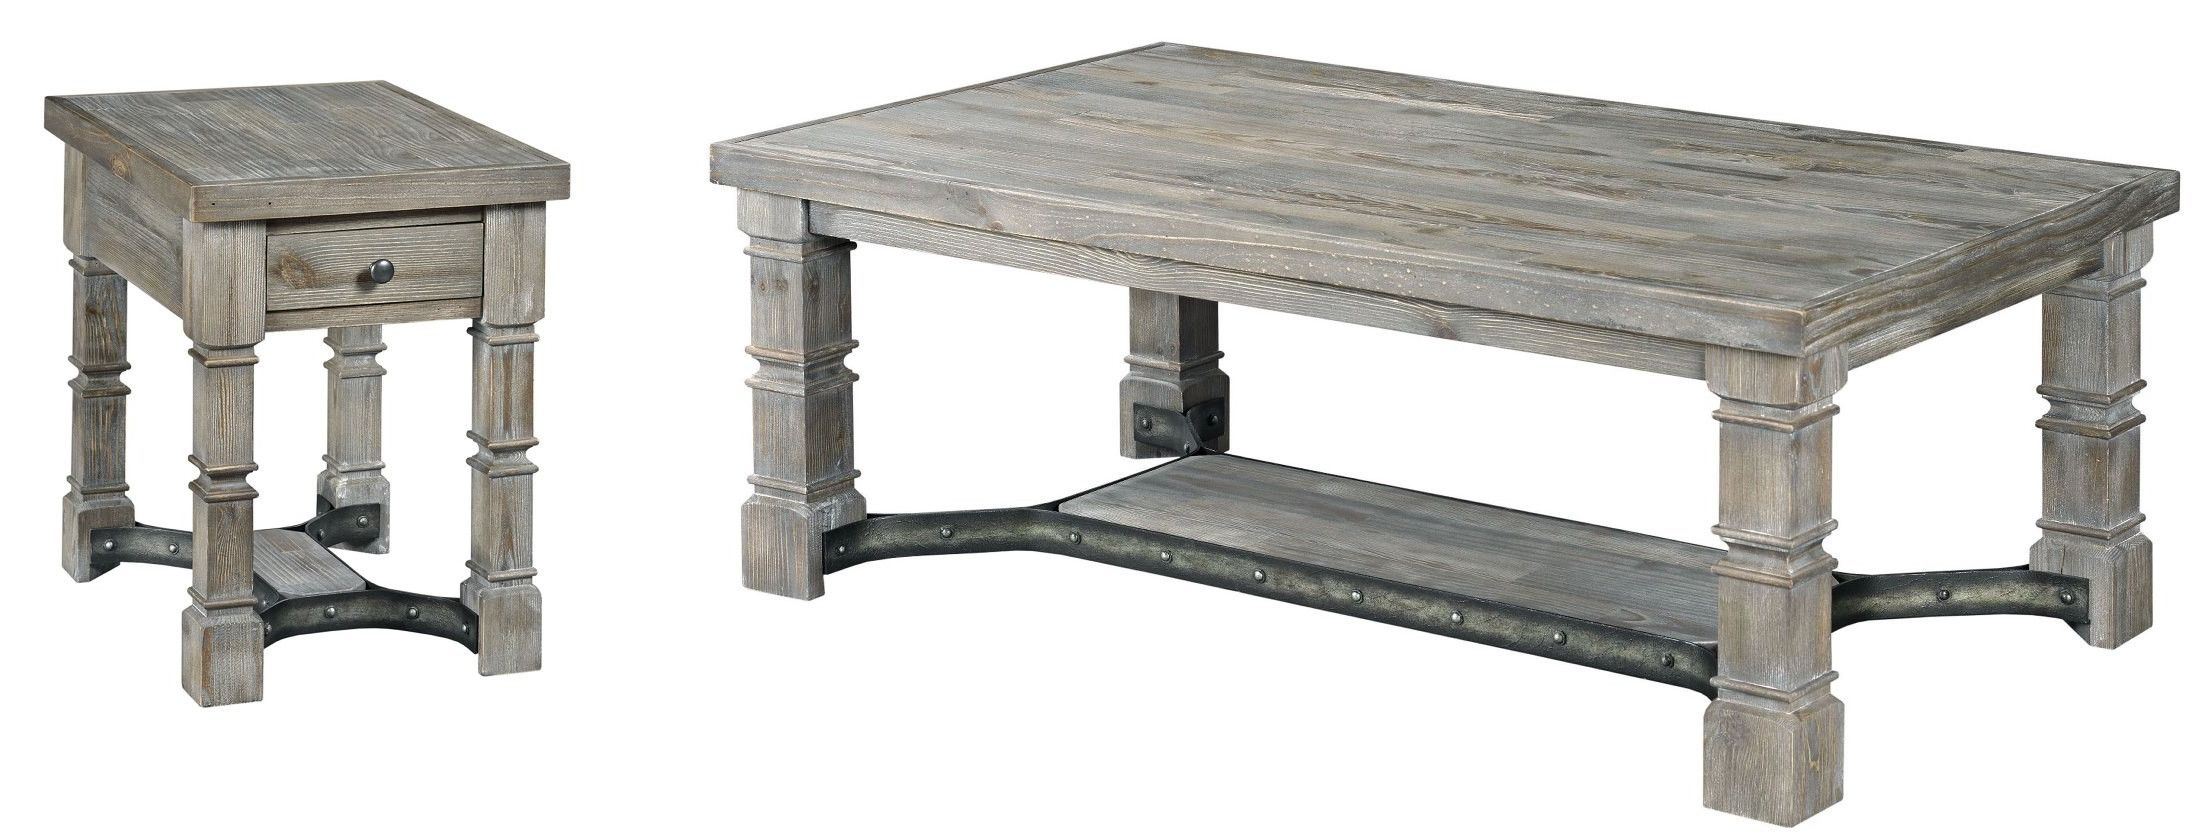 Favorite Smoked Barnwood Cocktail Tables Within Cheyenne Aged Barnwood Brown Rectangular Cocktail Table (View 12 of 20)